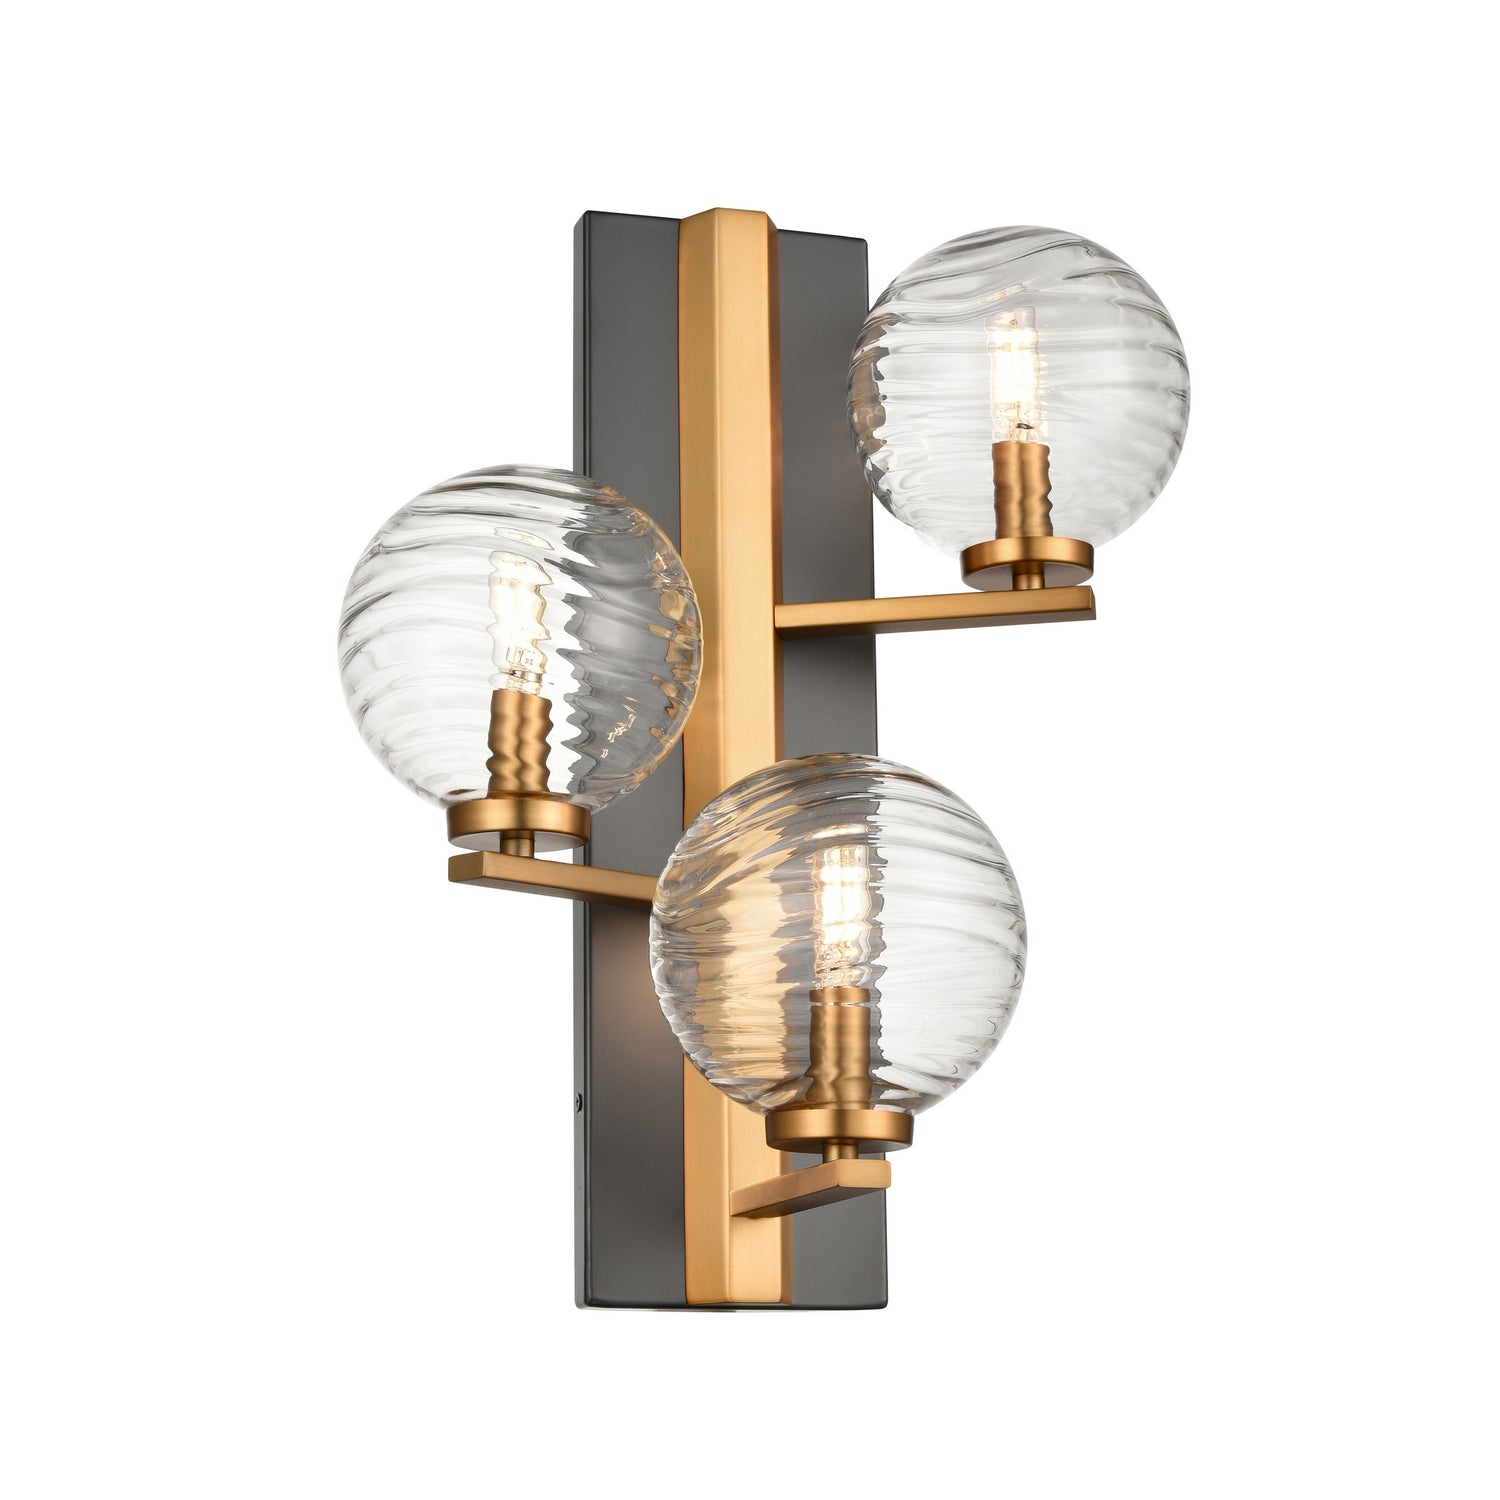 DVI Canada - Three Light Wall Sconce - Tropea - Brass And Graphite With Ripple Glass- Union Lighting Luminaires Decor